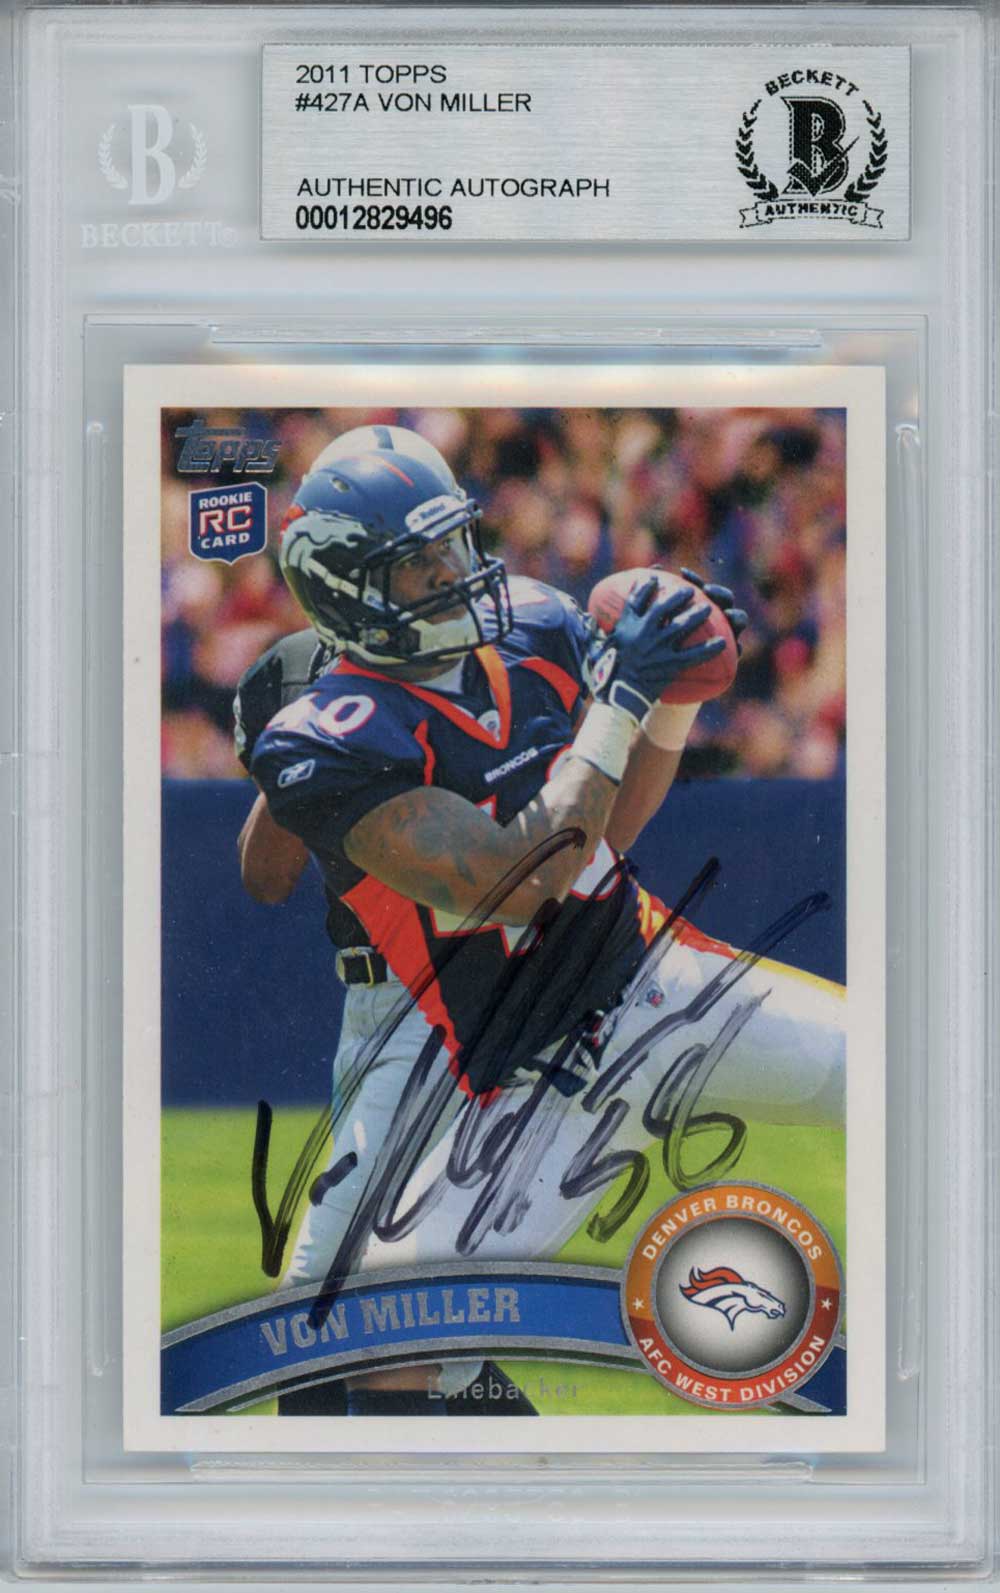 Von Miller Autographed/Signed 2011 Topps #427A Rookie Card BAS Slab 31393